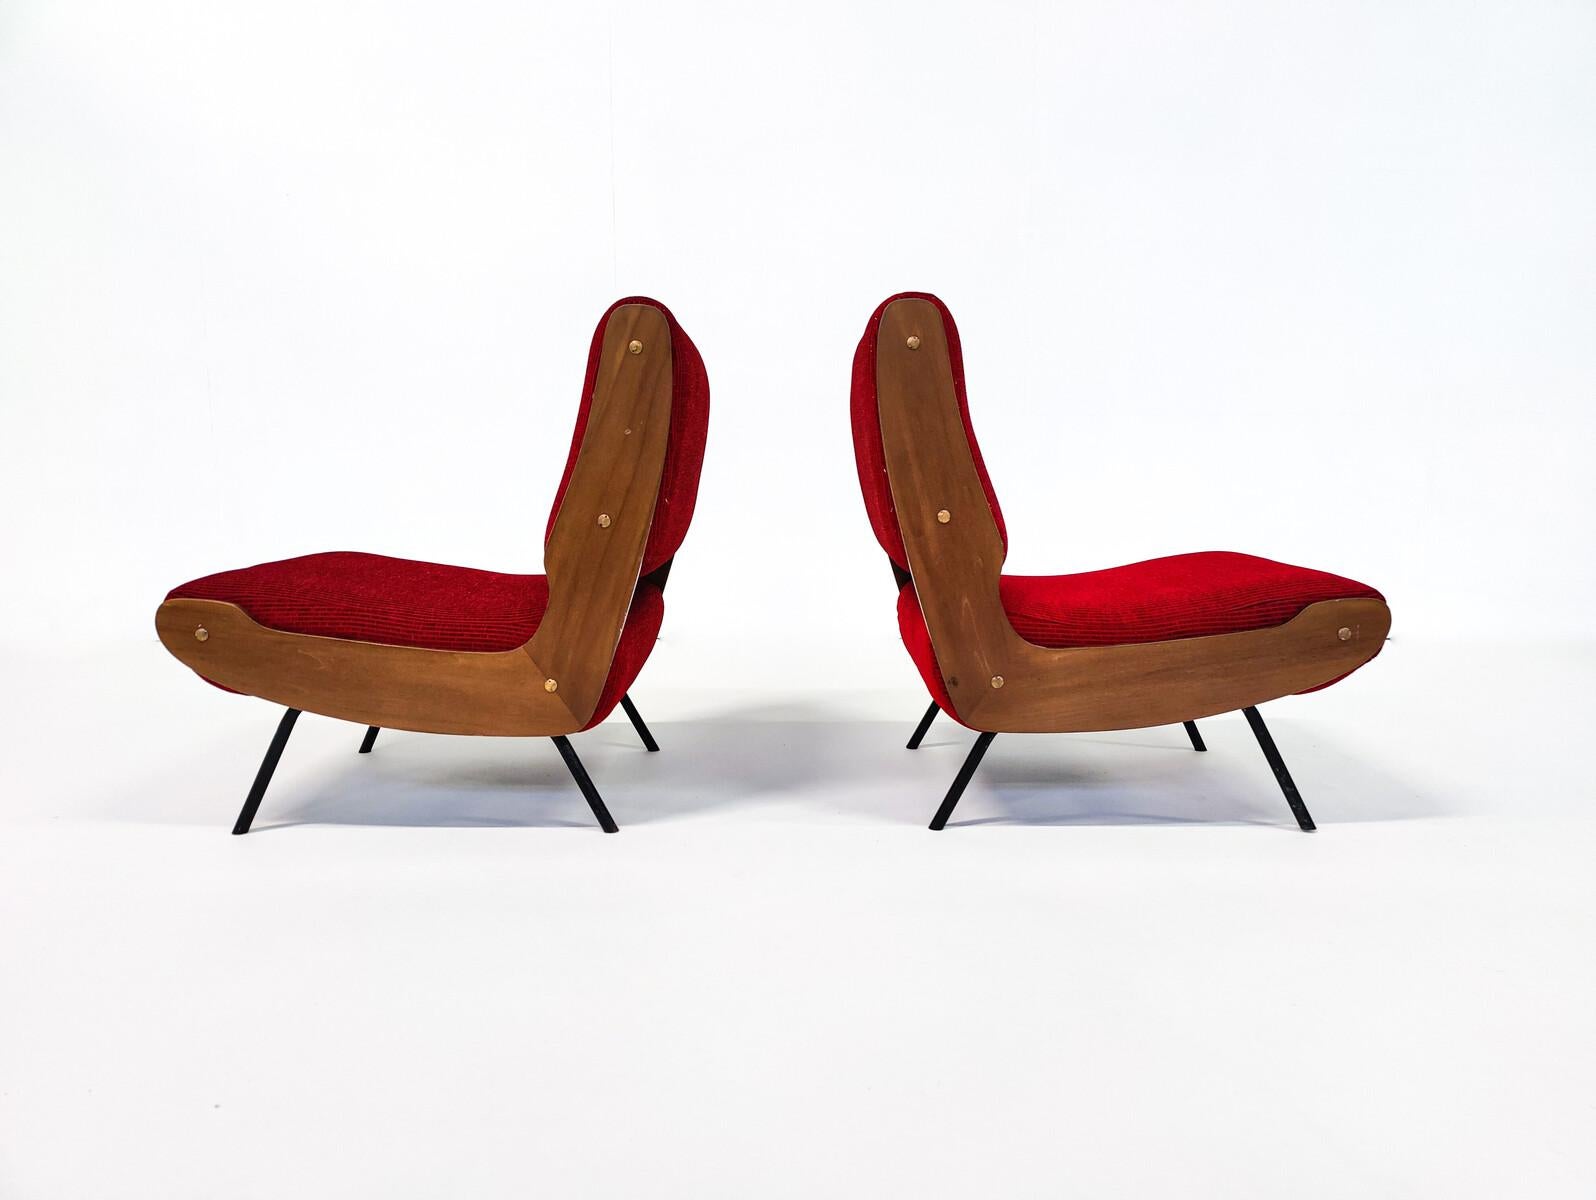 Italian Mid-Century Modern Pair of Armchairs 836 by Gianfranco Frattini for Cassina For Sale